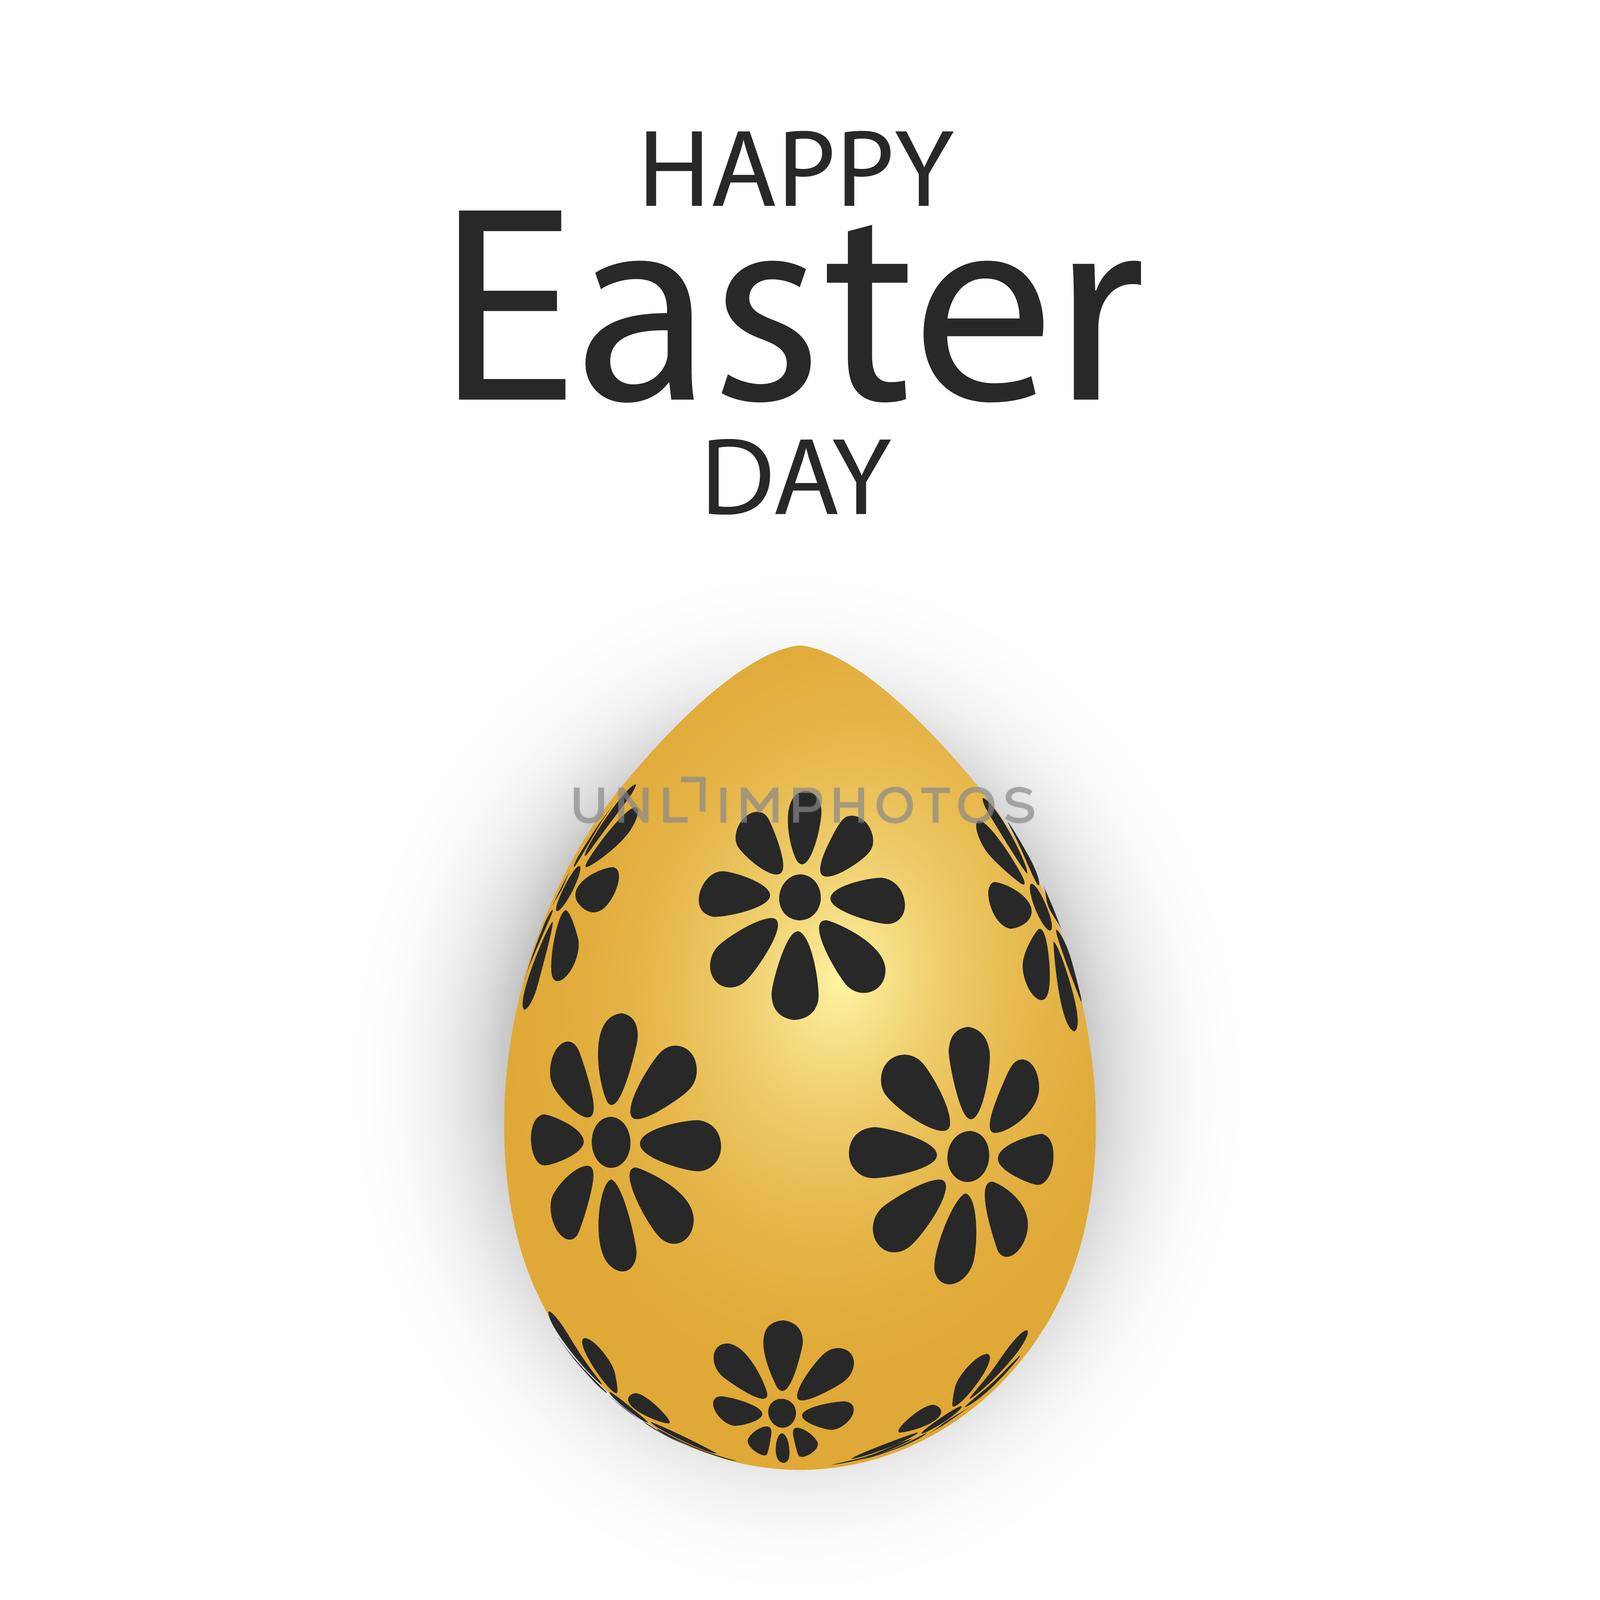 Easter background template with festive golden yellow eggs by BEMPhoto